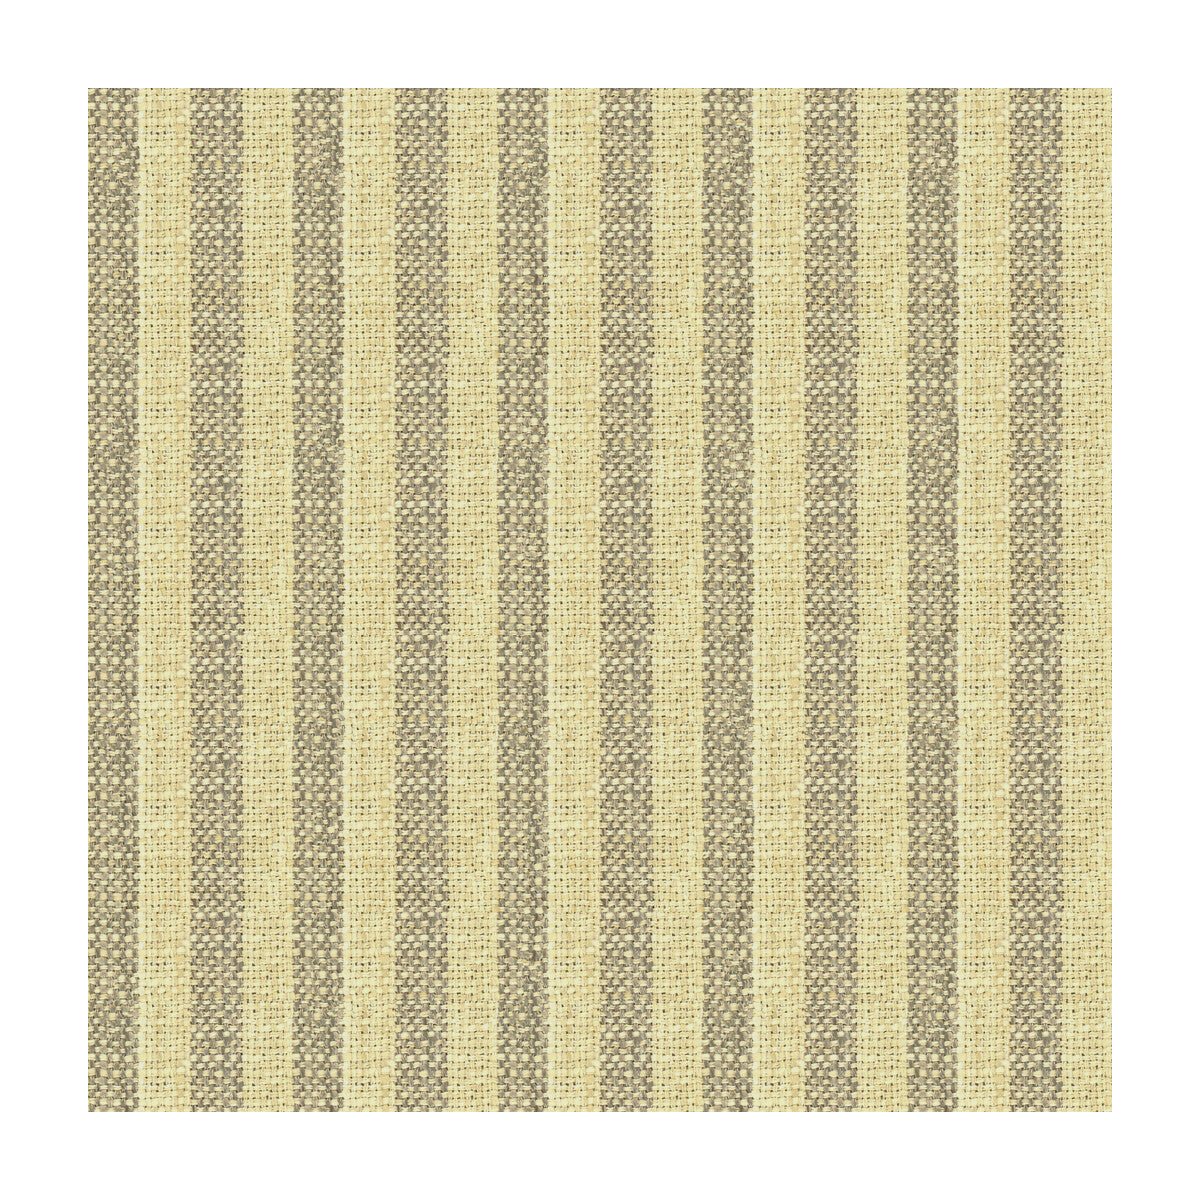 Kravet Basics fabric in 34080-1611 color - pattern 34080.1611.0 - by Kravet Basics in the Bungalow Chic II collection